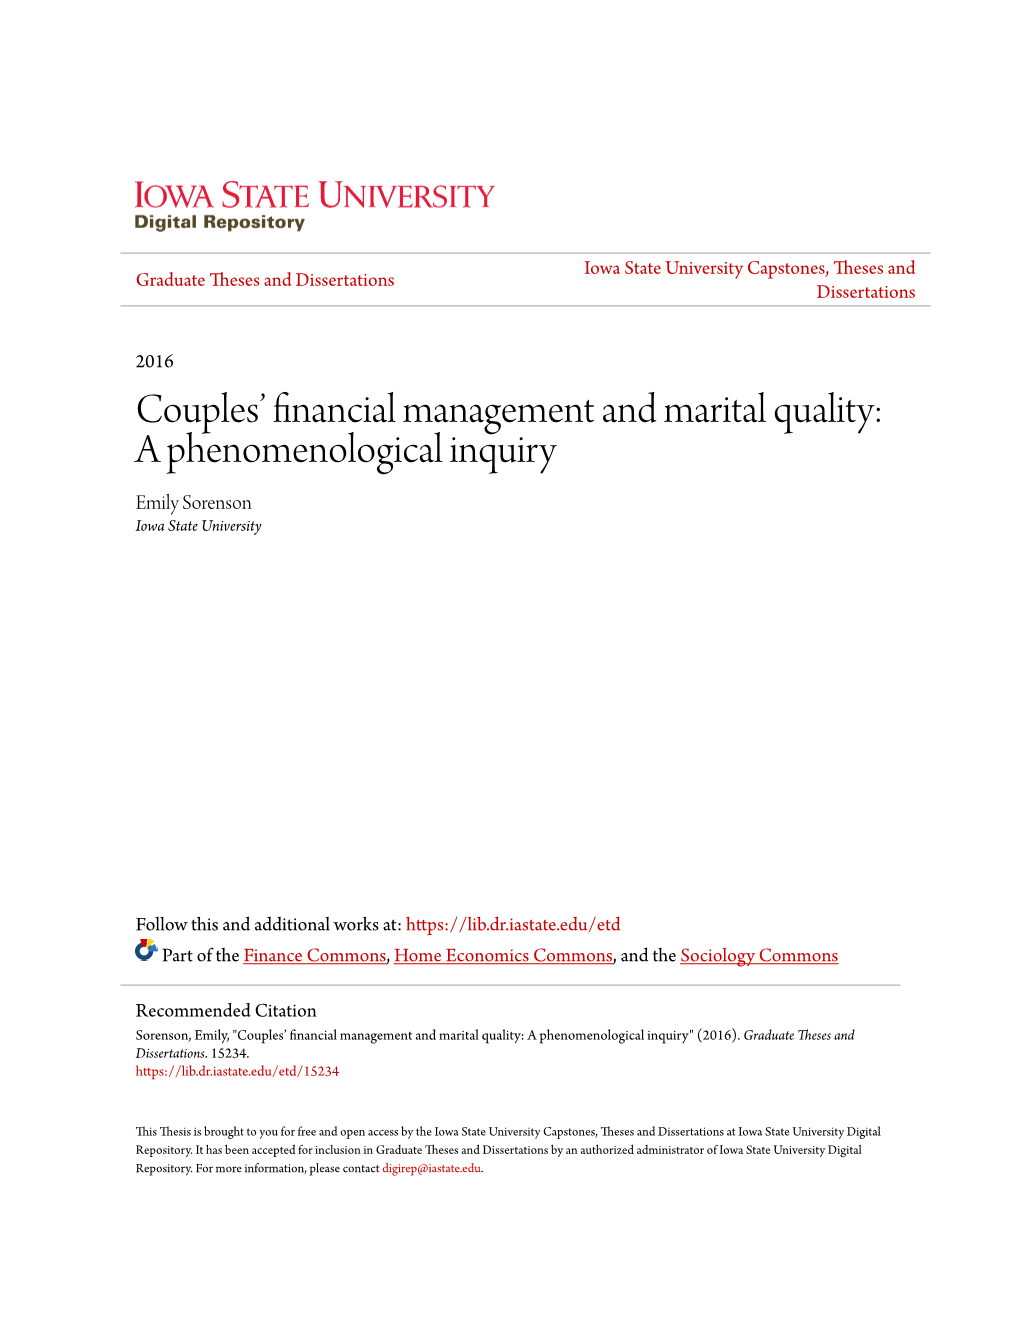 Couples' Financial Management and Marital Quality: a Phenomenological